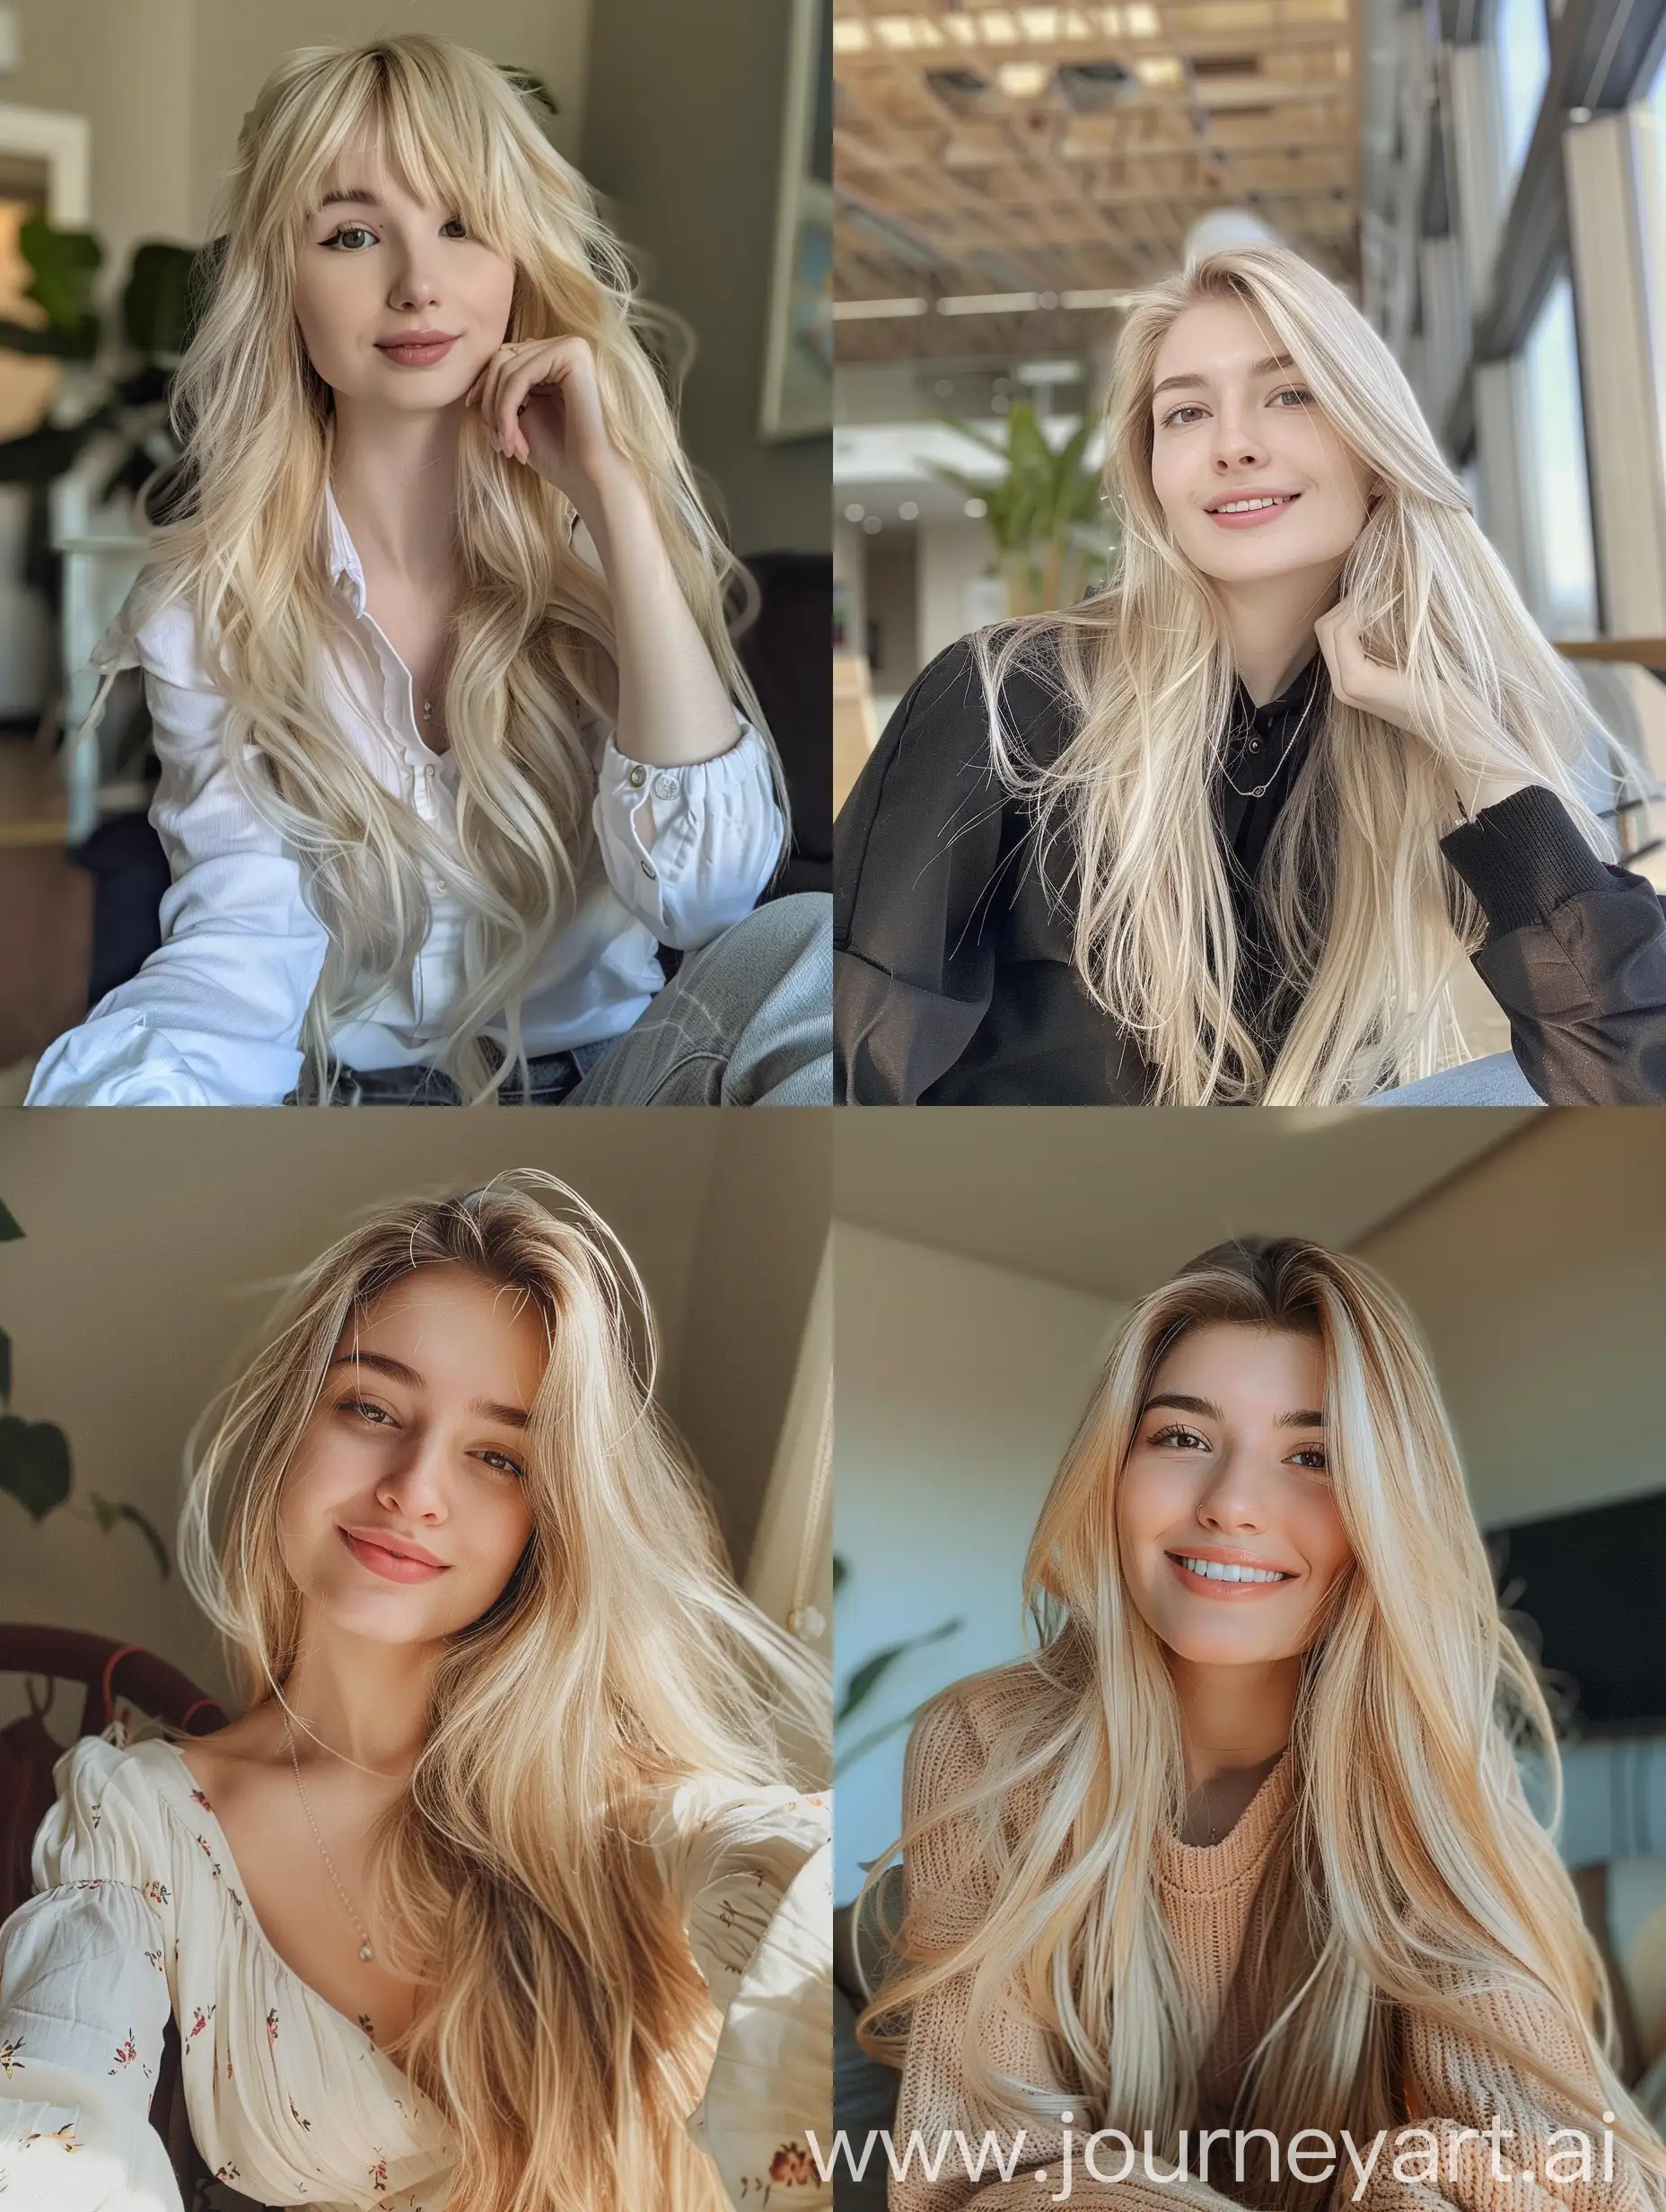 1  girl,    long  blond  hair ,   22  years  old,    influencer,    beauty   ,     in  the  school    ,cosplay, cosplayer   ,  makeup,   smiling, chão view,      sitting  on  chair  ,     no  effect,     selfie   , iphone  selfie,      no  filters ,   iphone  photo    natural